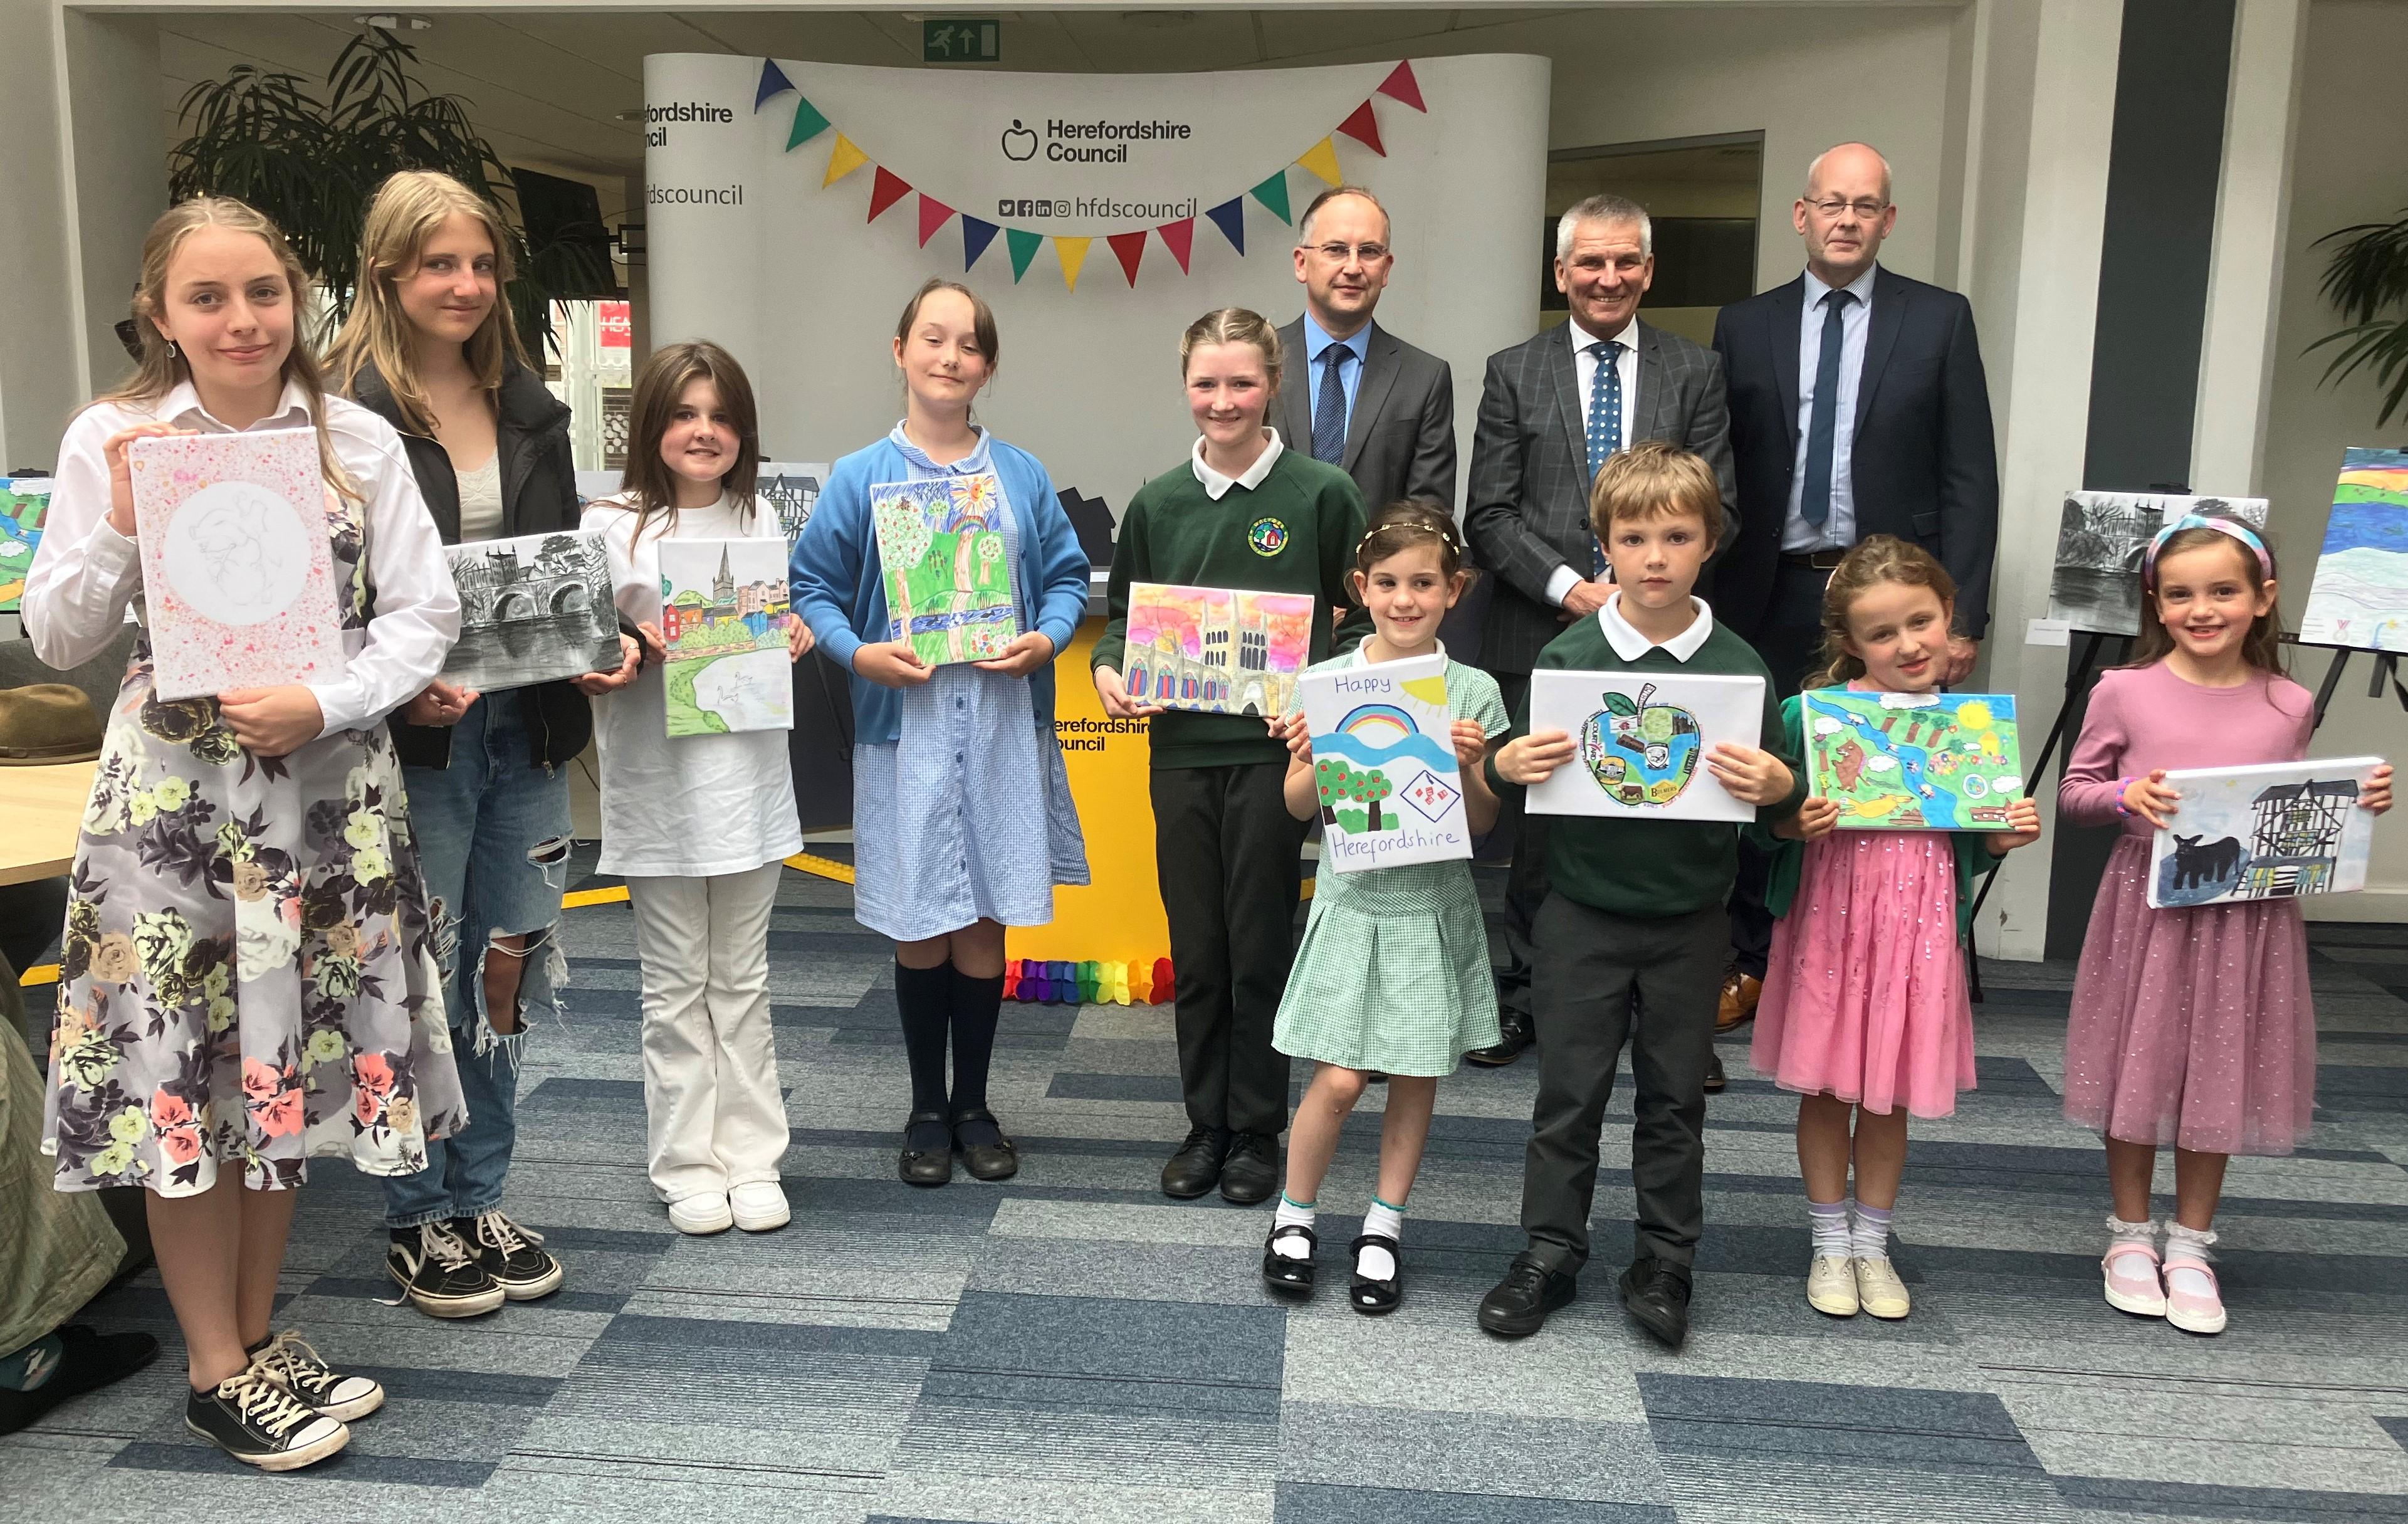 School artwork competition winners celebrated at awards event